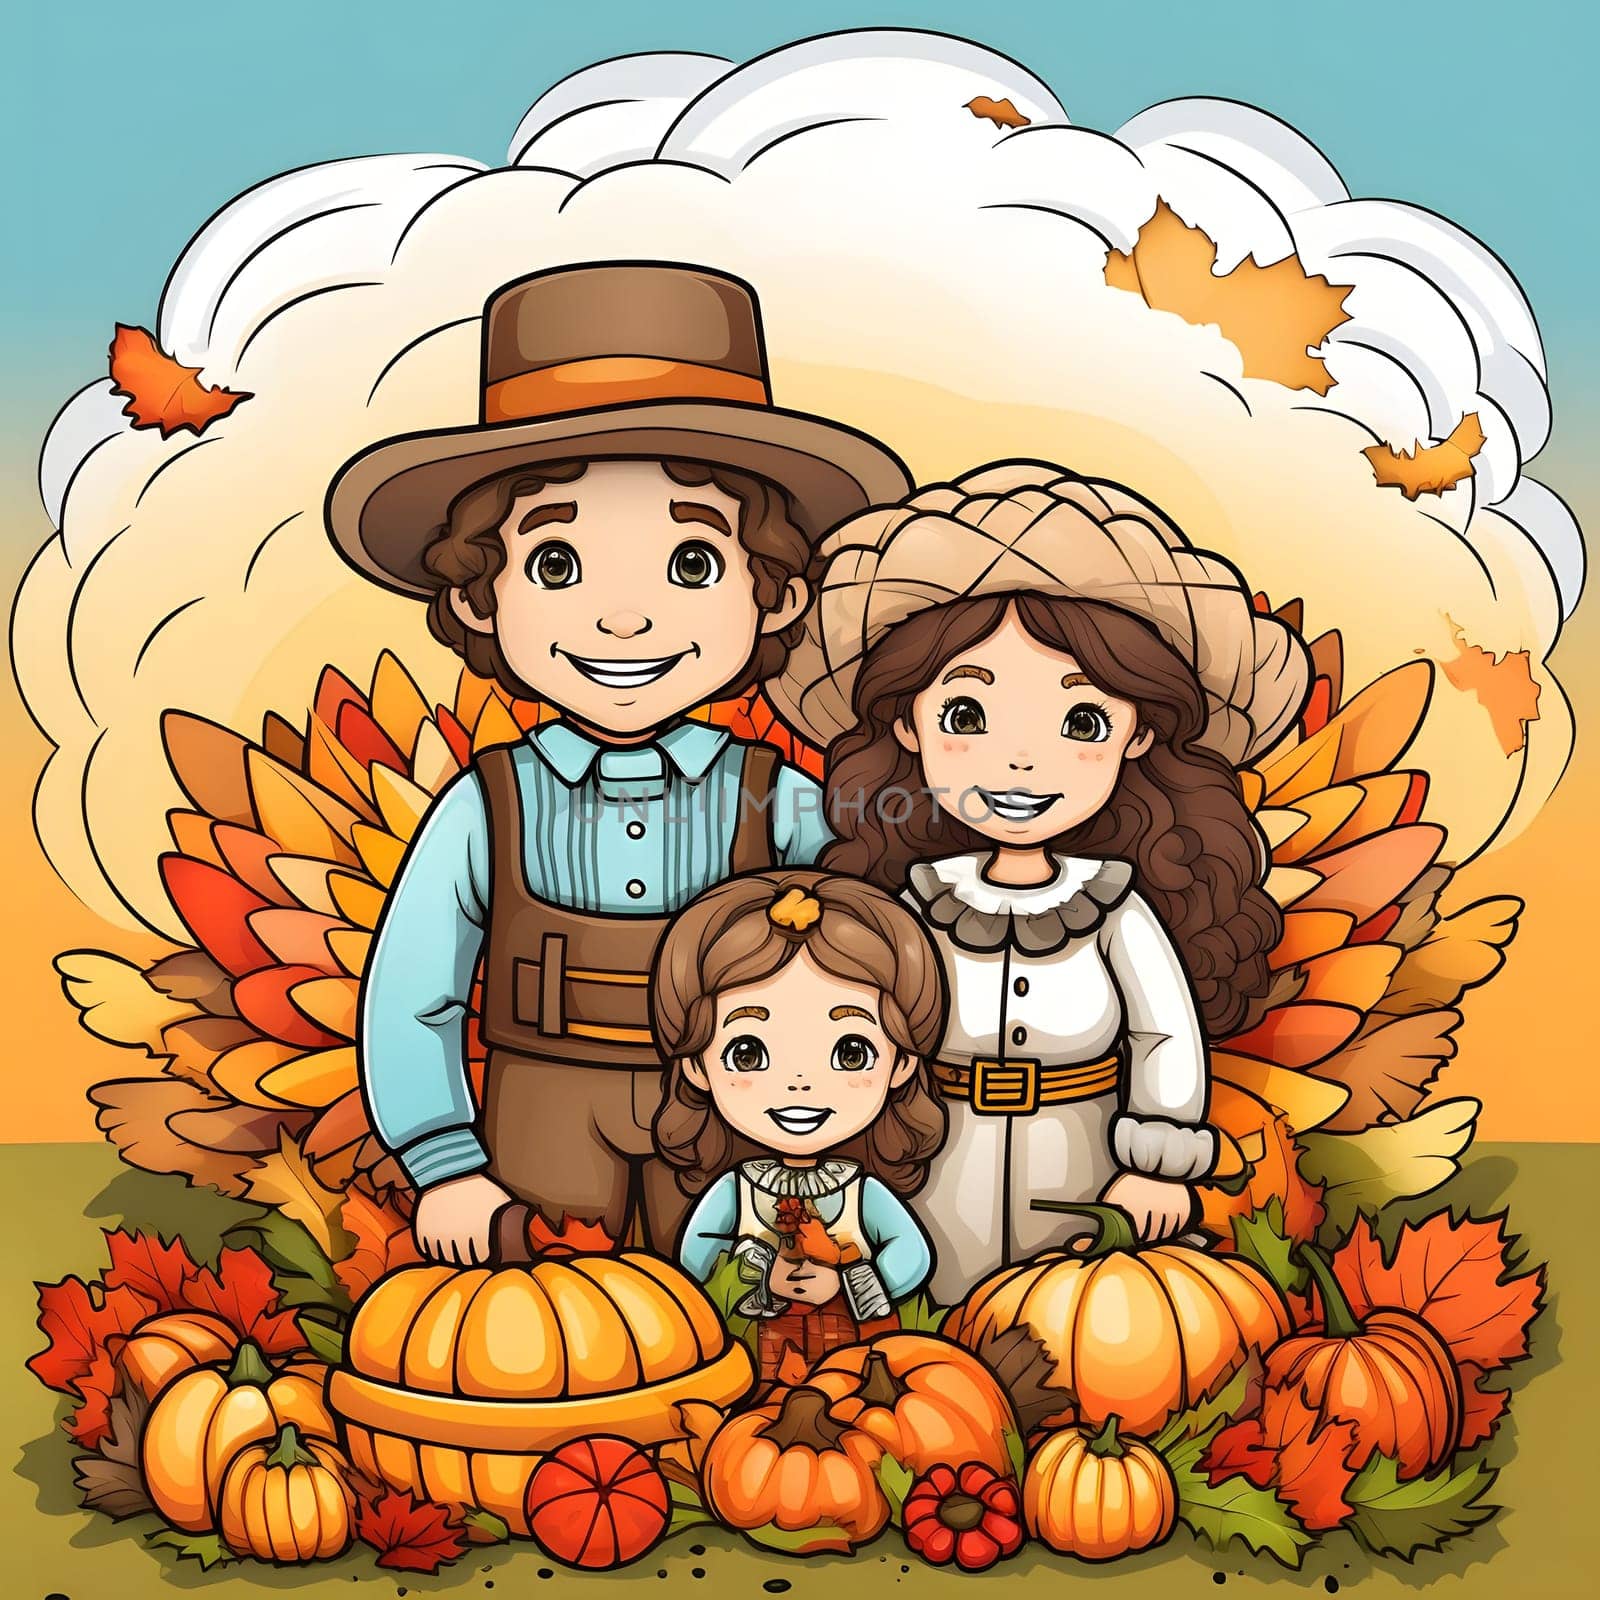 Illustrated happy family around pumpkins. Pumpkin as a dish of thanksgiving for the harvest. by ThemesS